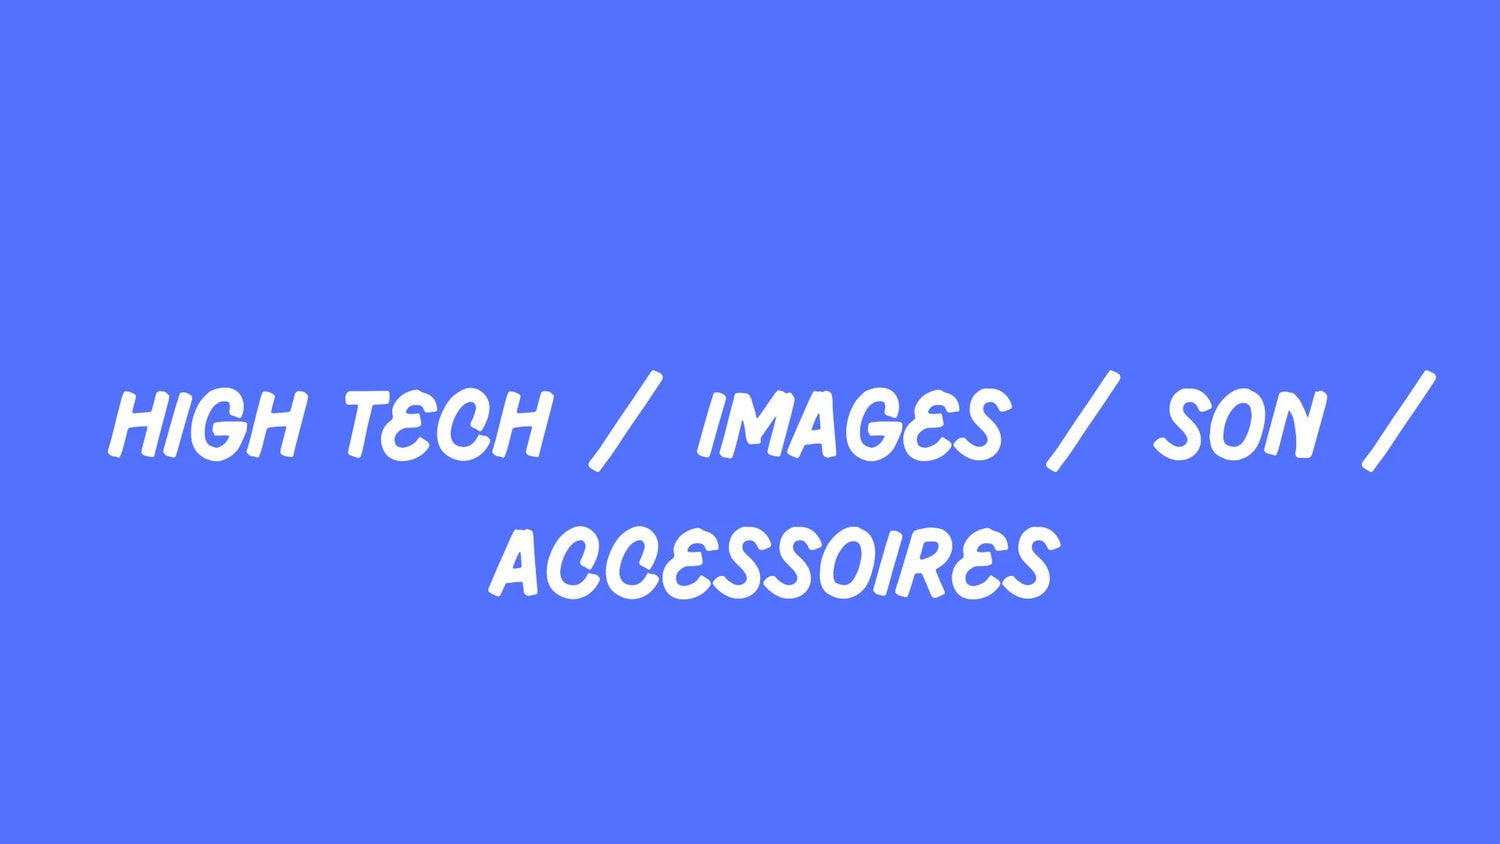 High Tech / Images / Sound / Accessories